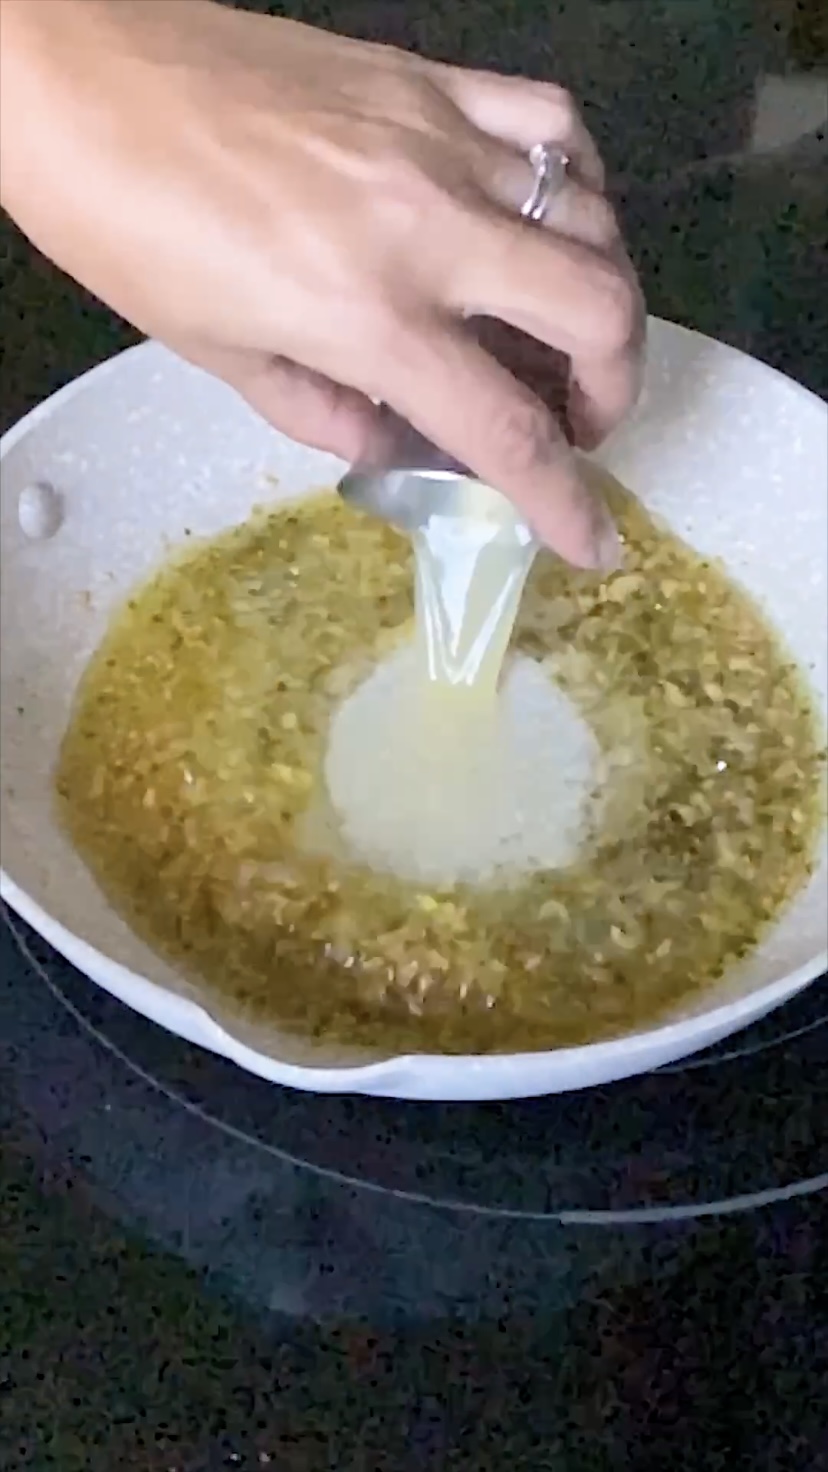 Adding lemon juice to olive oil and garlic in a skillet.